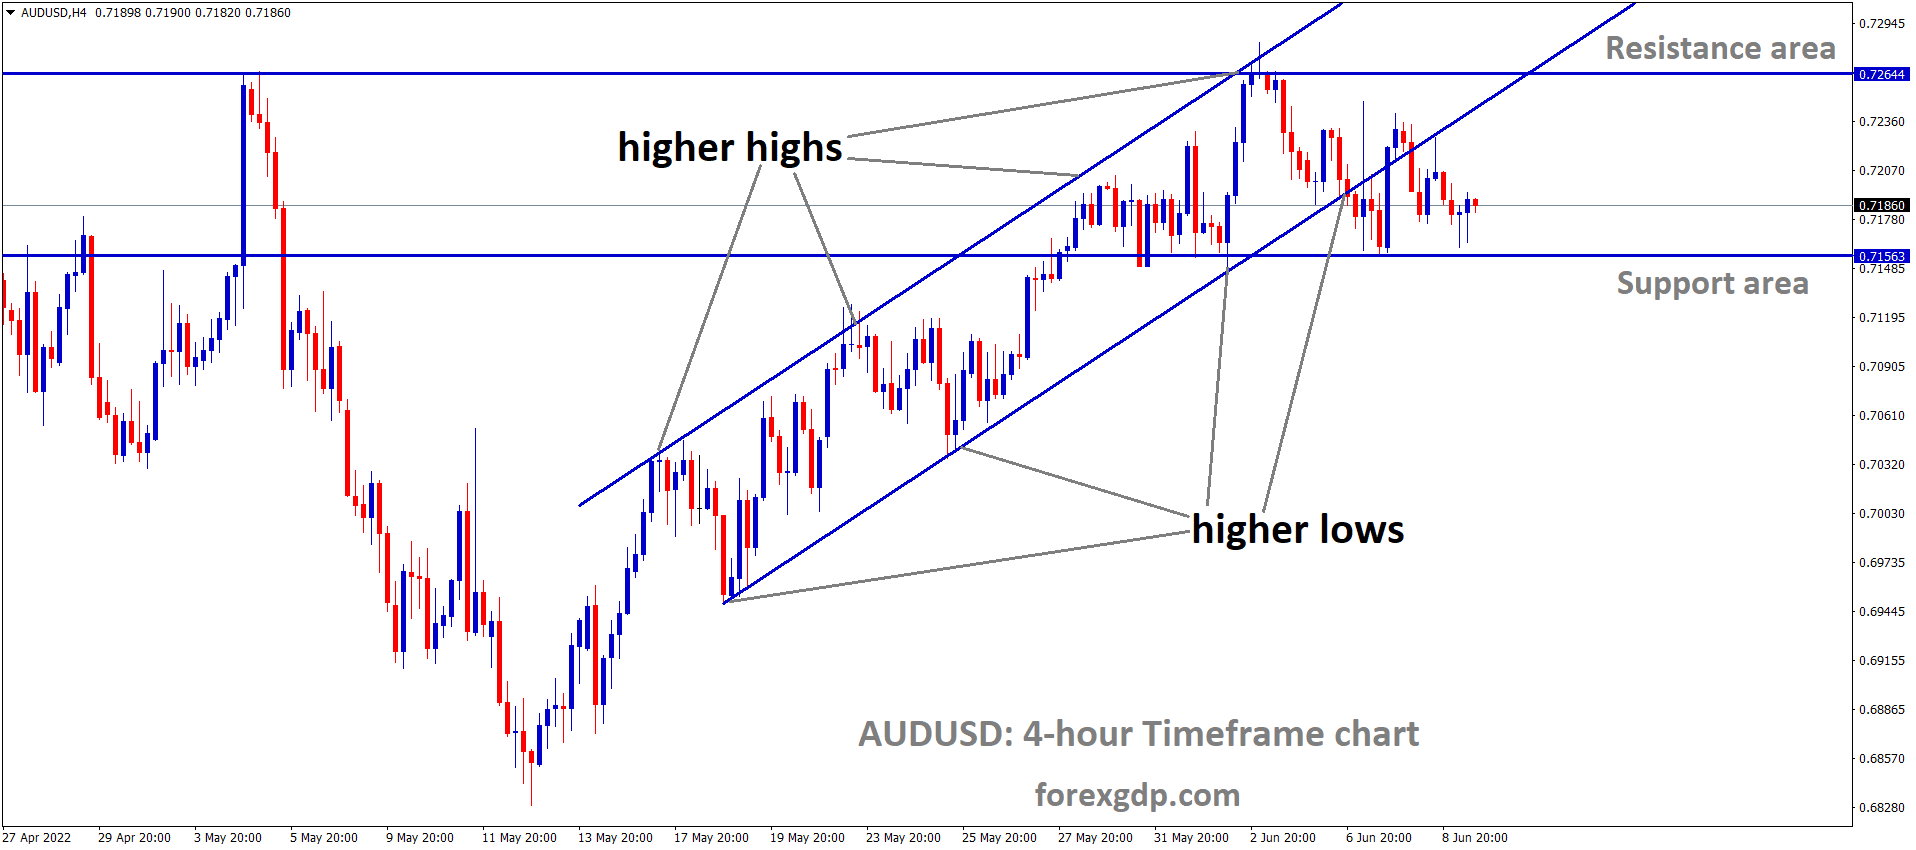 AUDUSD is moving in an Ascending channel and the market has rebounded from the Horizontal support area and higher low area of the channel